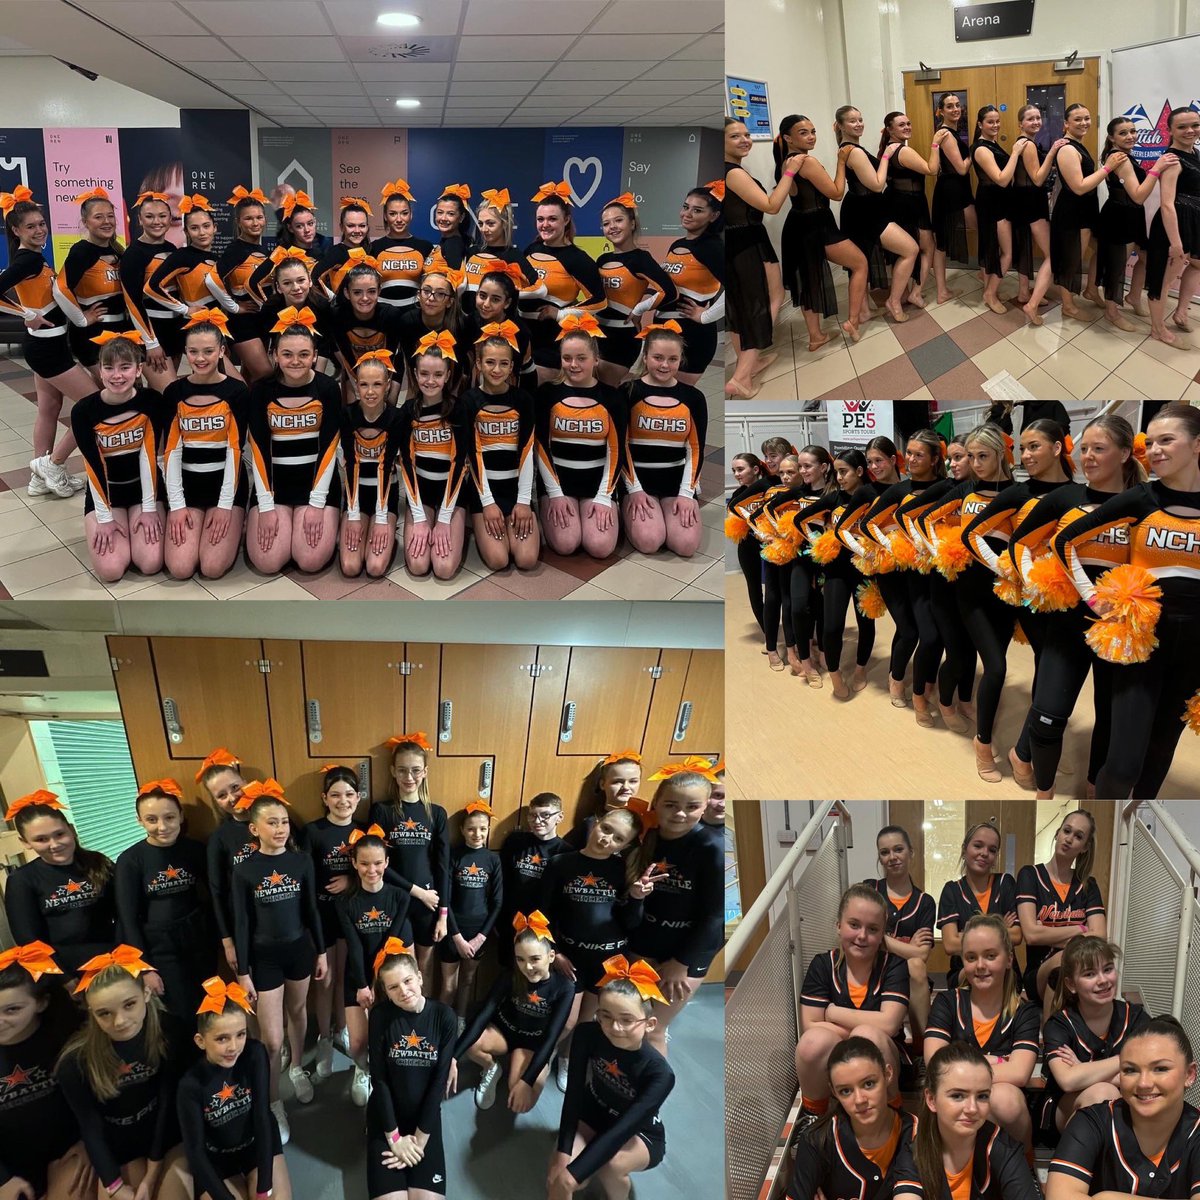 🧡A fantastic Friday spent @SSCheerleading where we had a team in all 5 categories! 👏🏻We are so proud of all of our performers, captains & @MissDuvallPE for their phenomenal efforts. 📹Video to follow showcasing our day & photos will be shared.